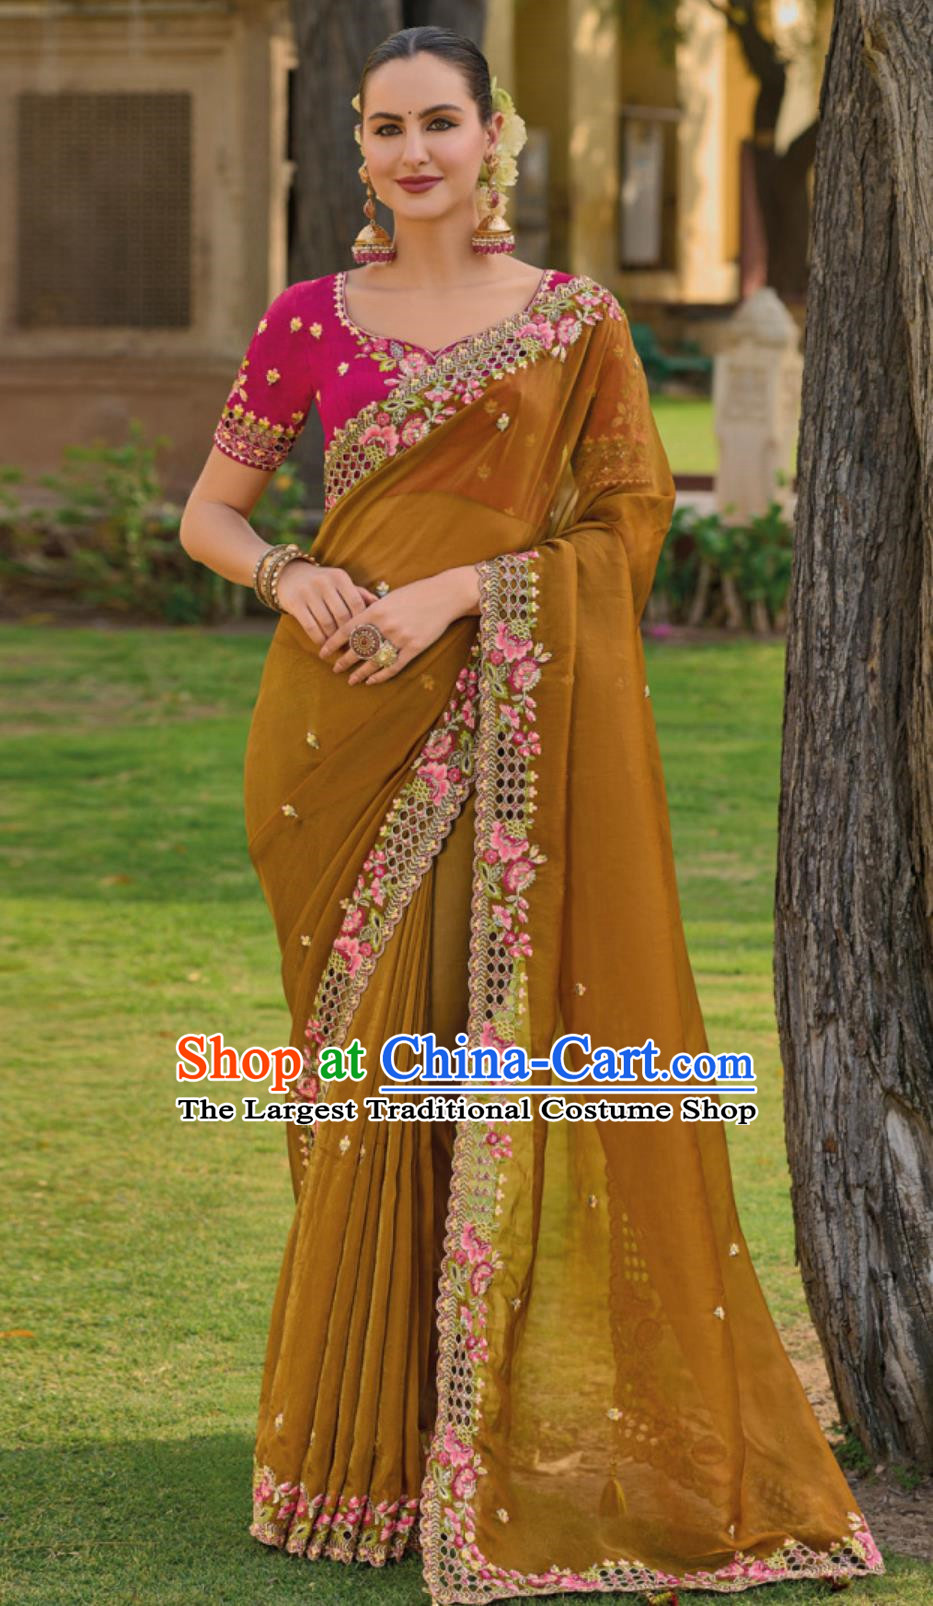 India Women Embroidered Ginger Saree Dress Traditional Sari National Clothing Indian Festival Costume